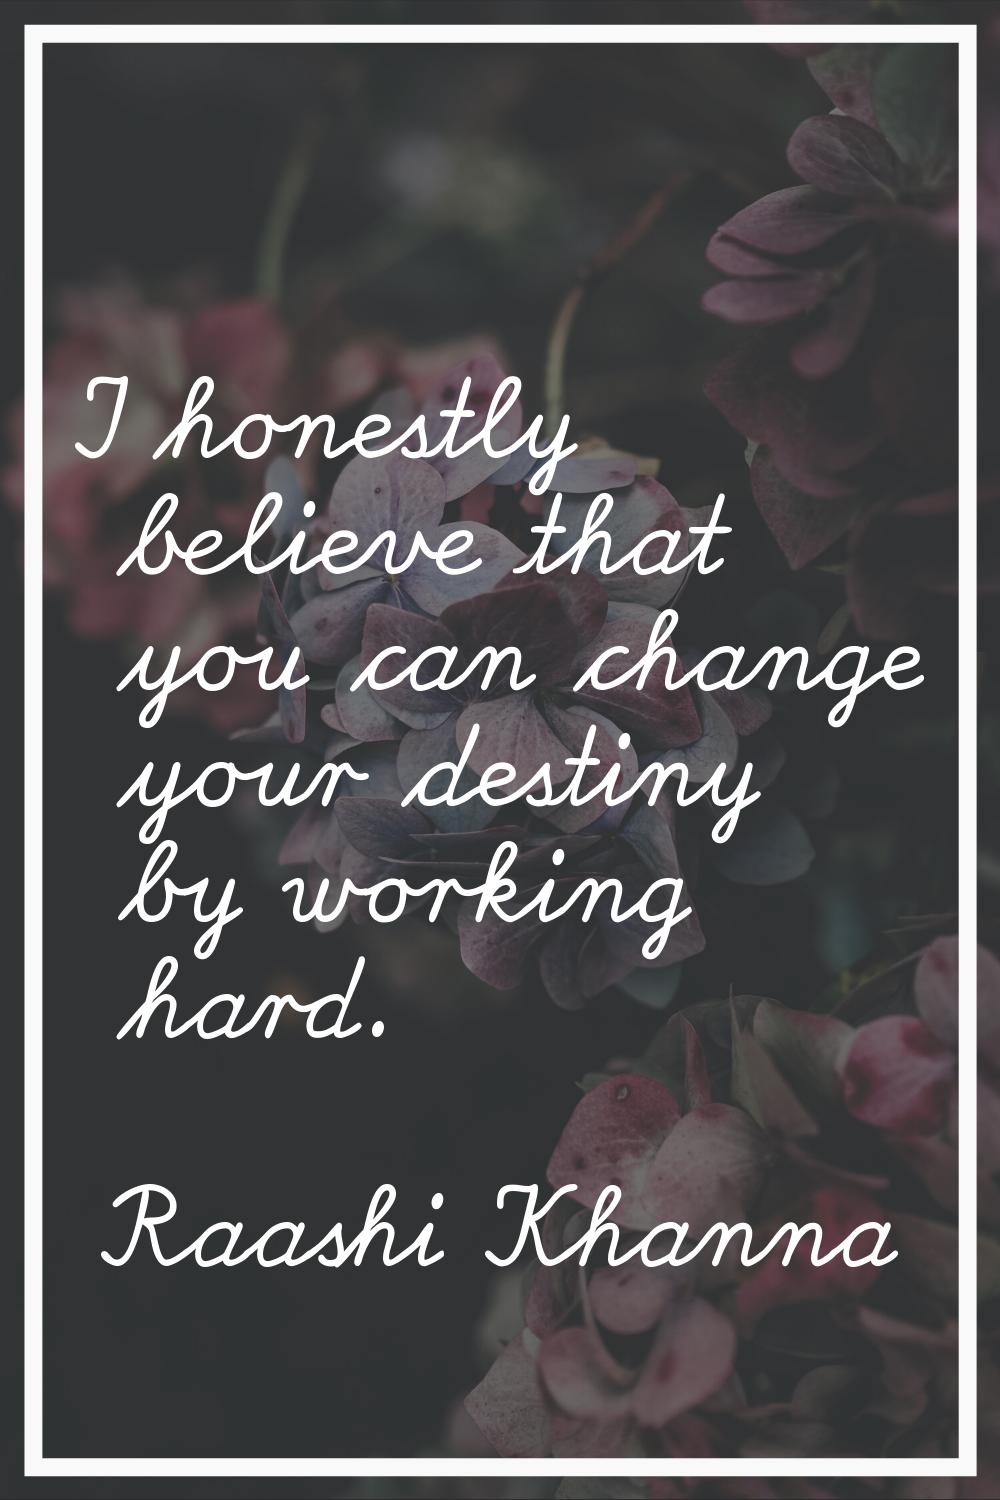 I honestly believe that you can change your destiny by working hard.